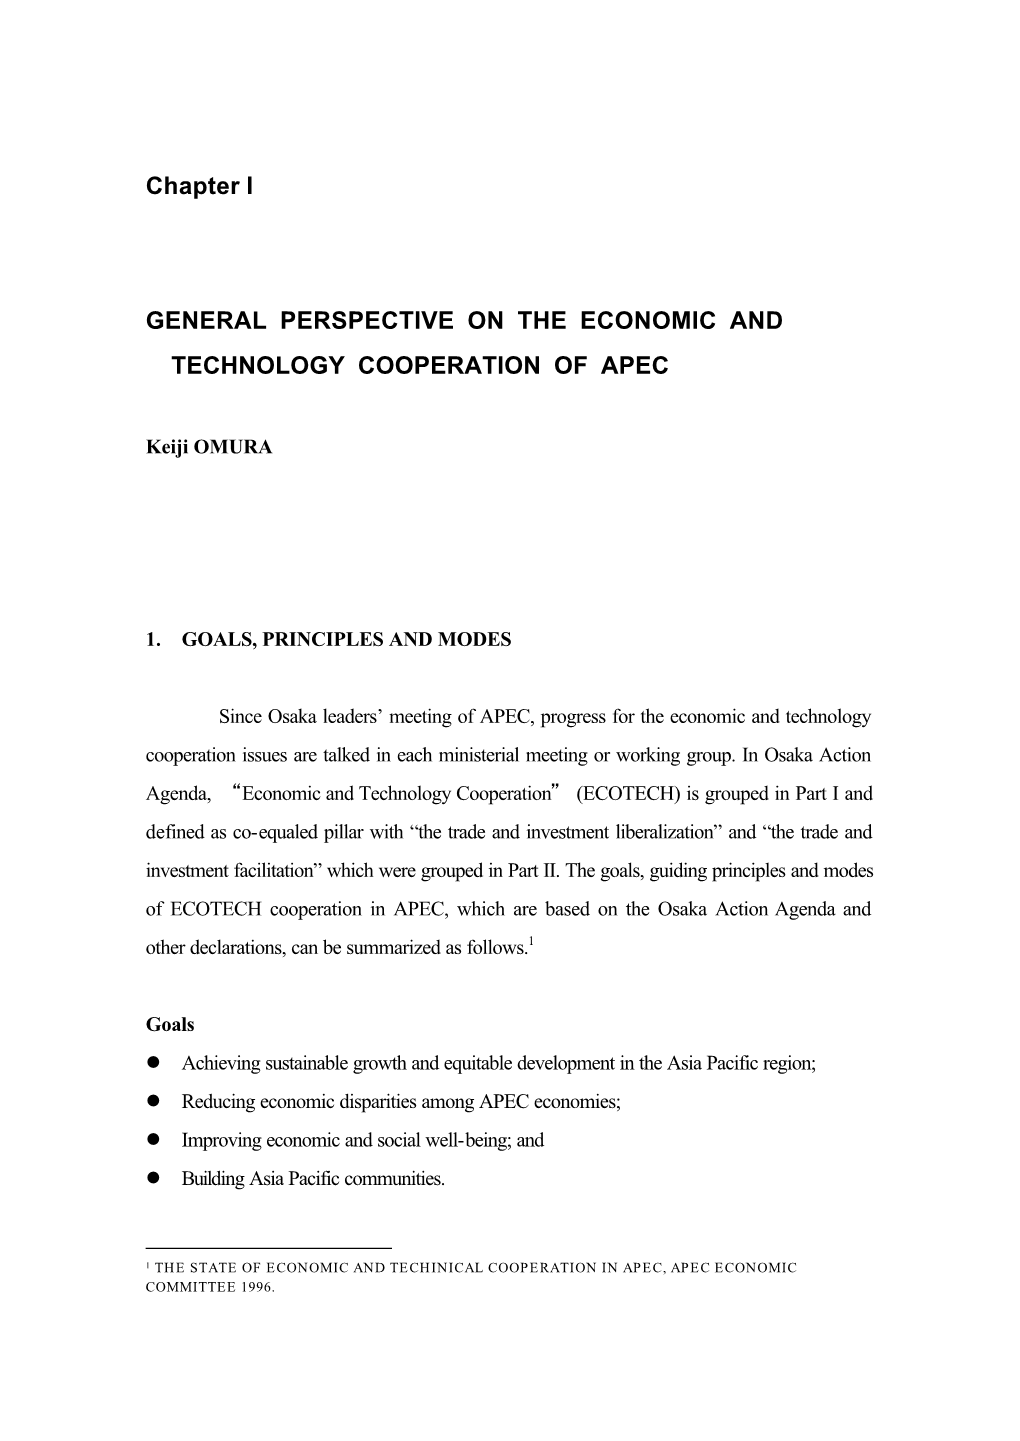 General Perspective on the Economic and Technology Cooperation of Apec